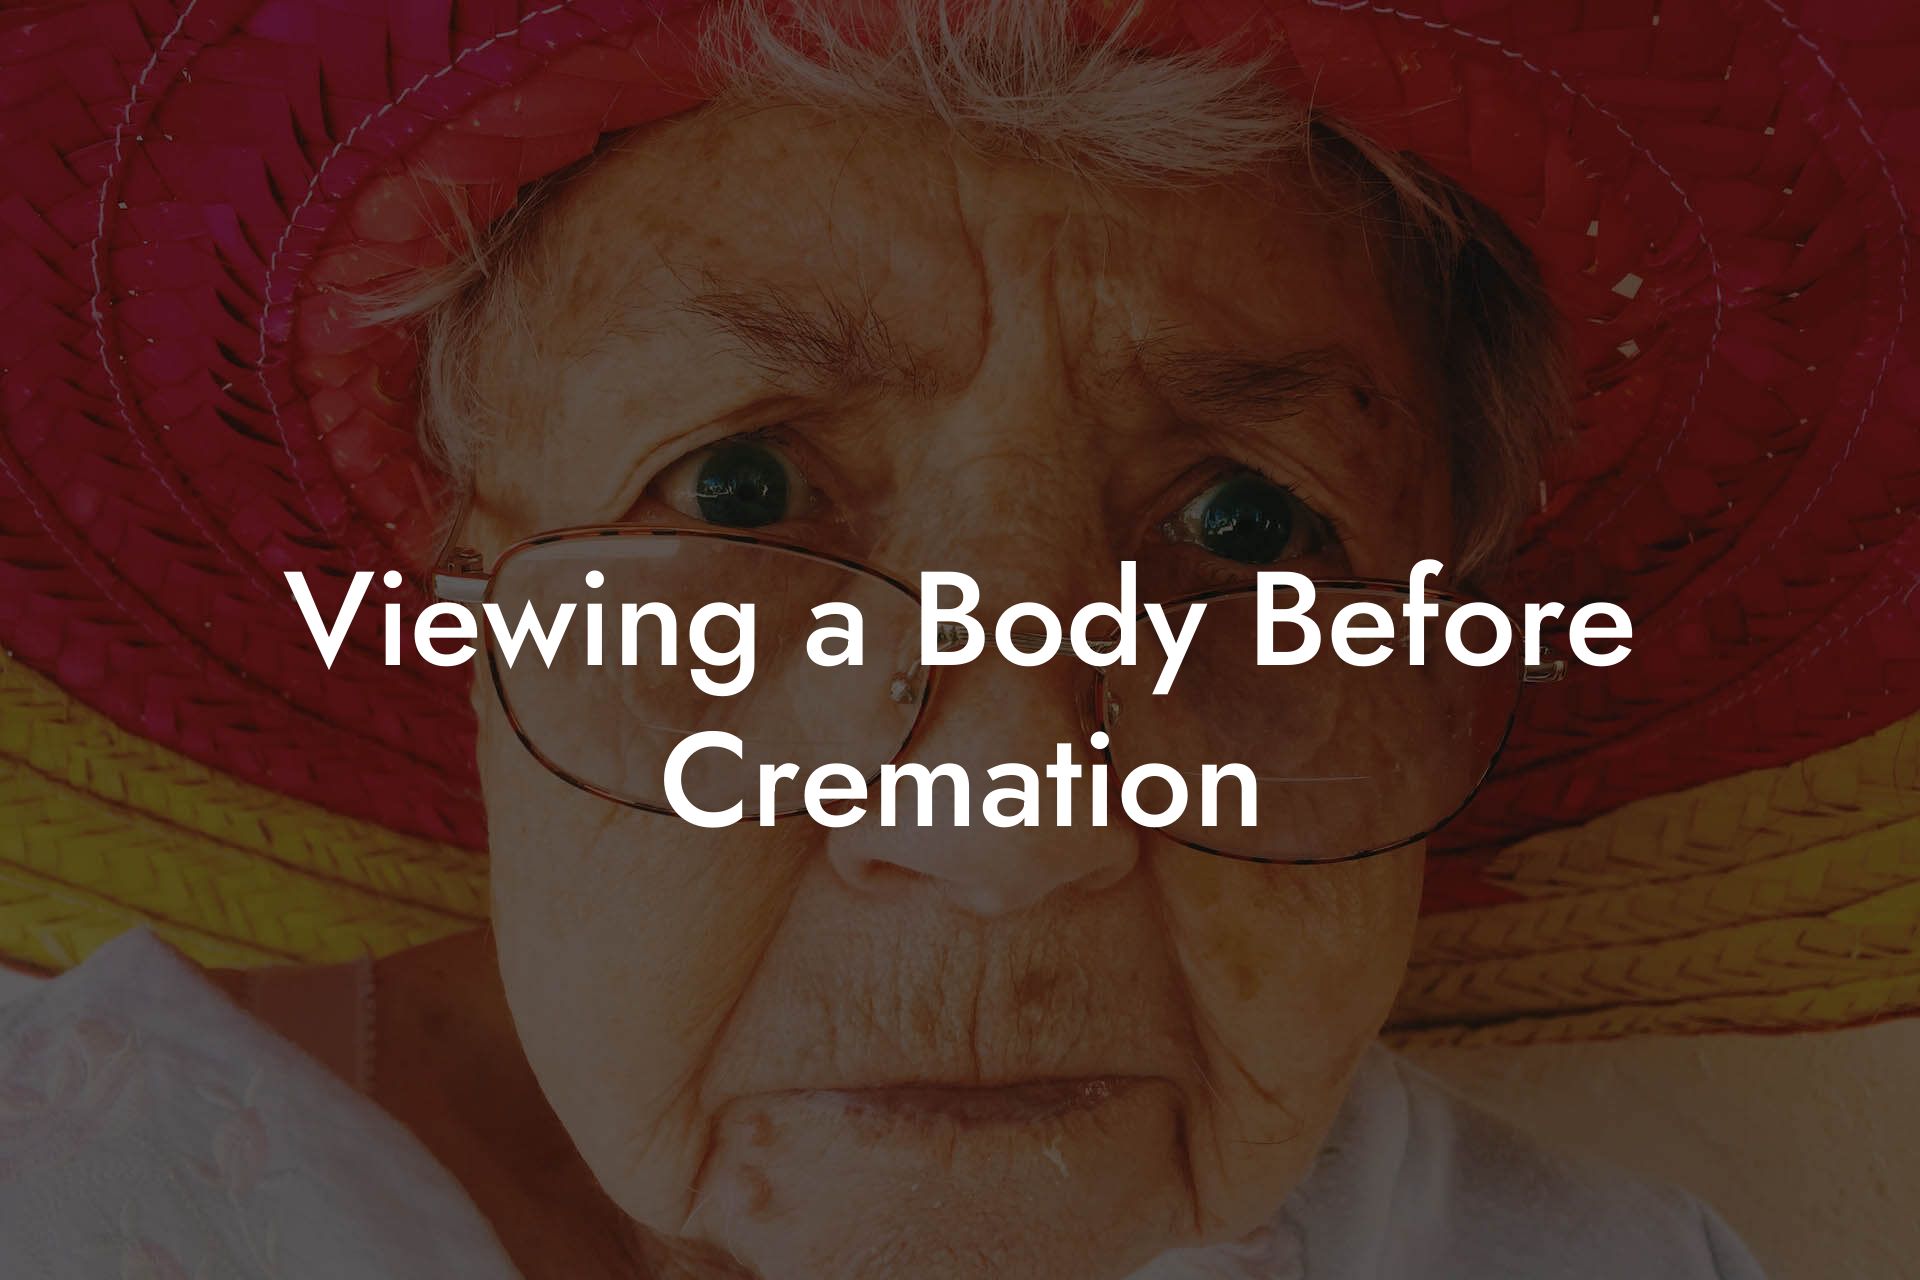 Viewing a Body Before Cremation